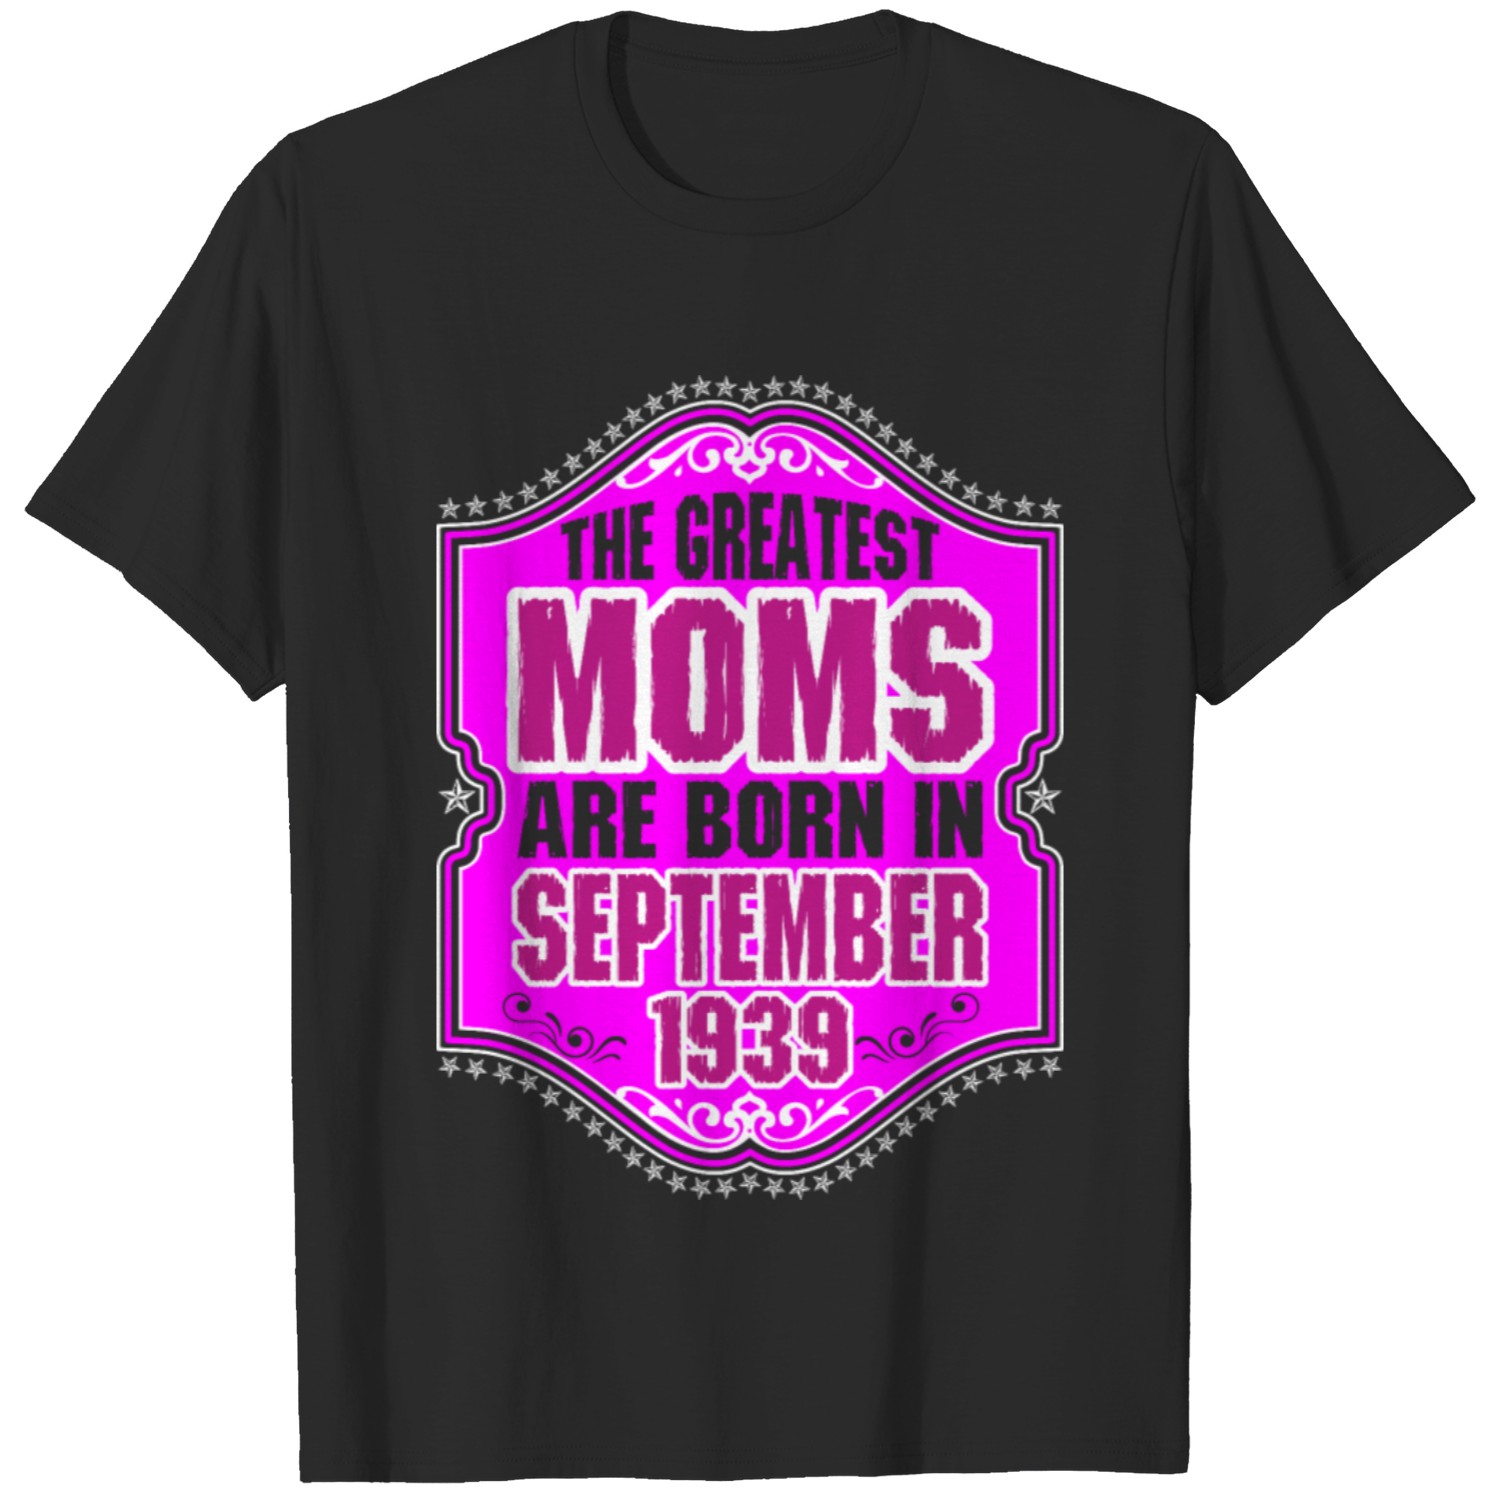 The Greatest Moms Are Born In September 1939 T-shirt